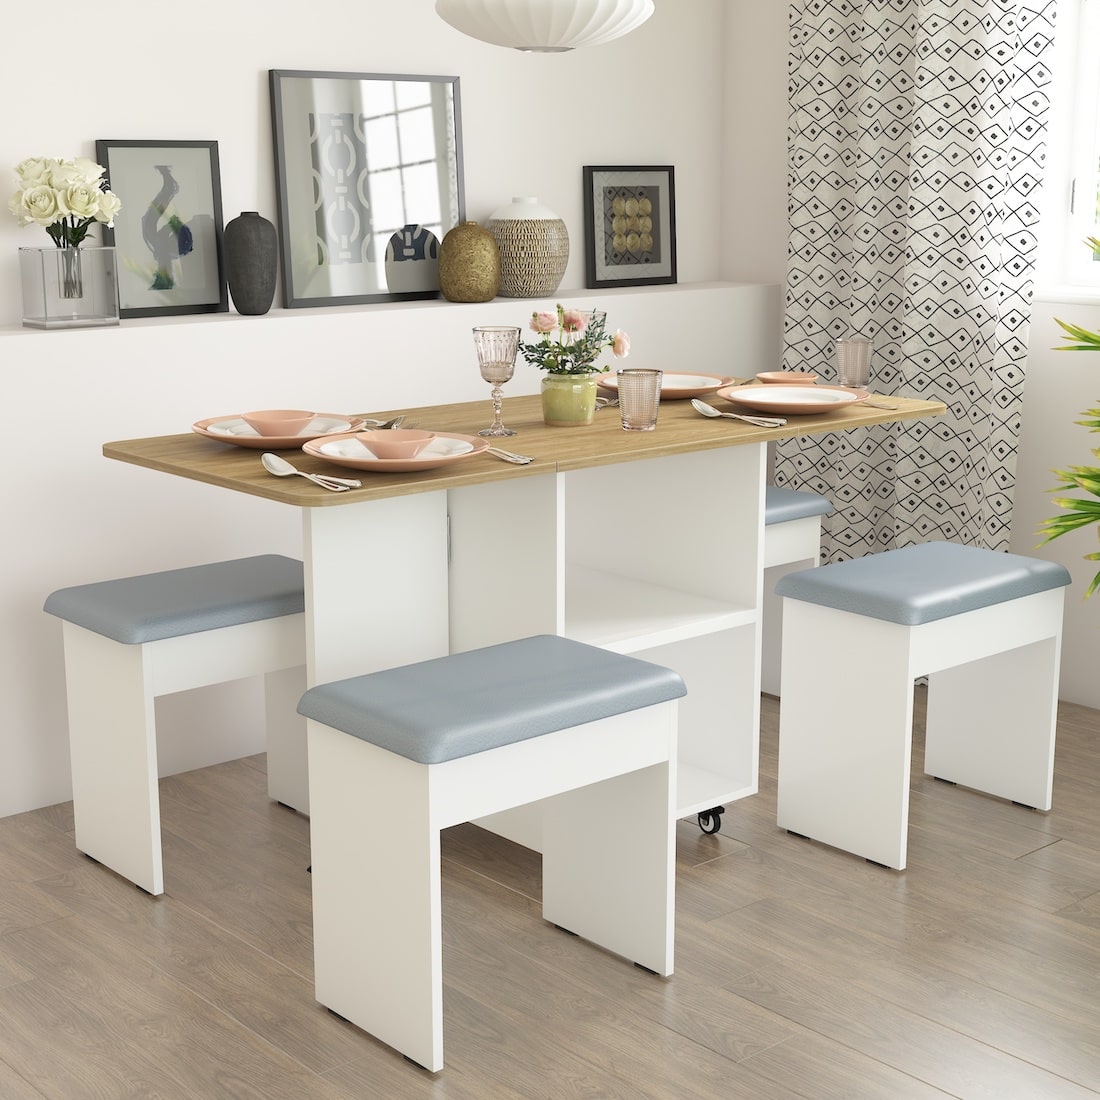 Bonbon 4 Seater Folding Dining table with Inbuilt Seating